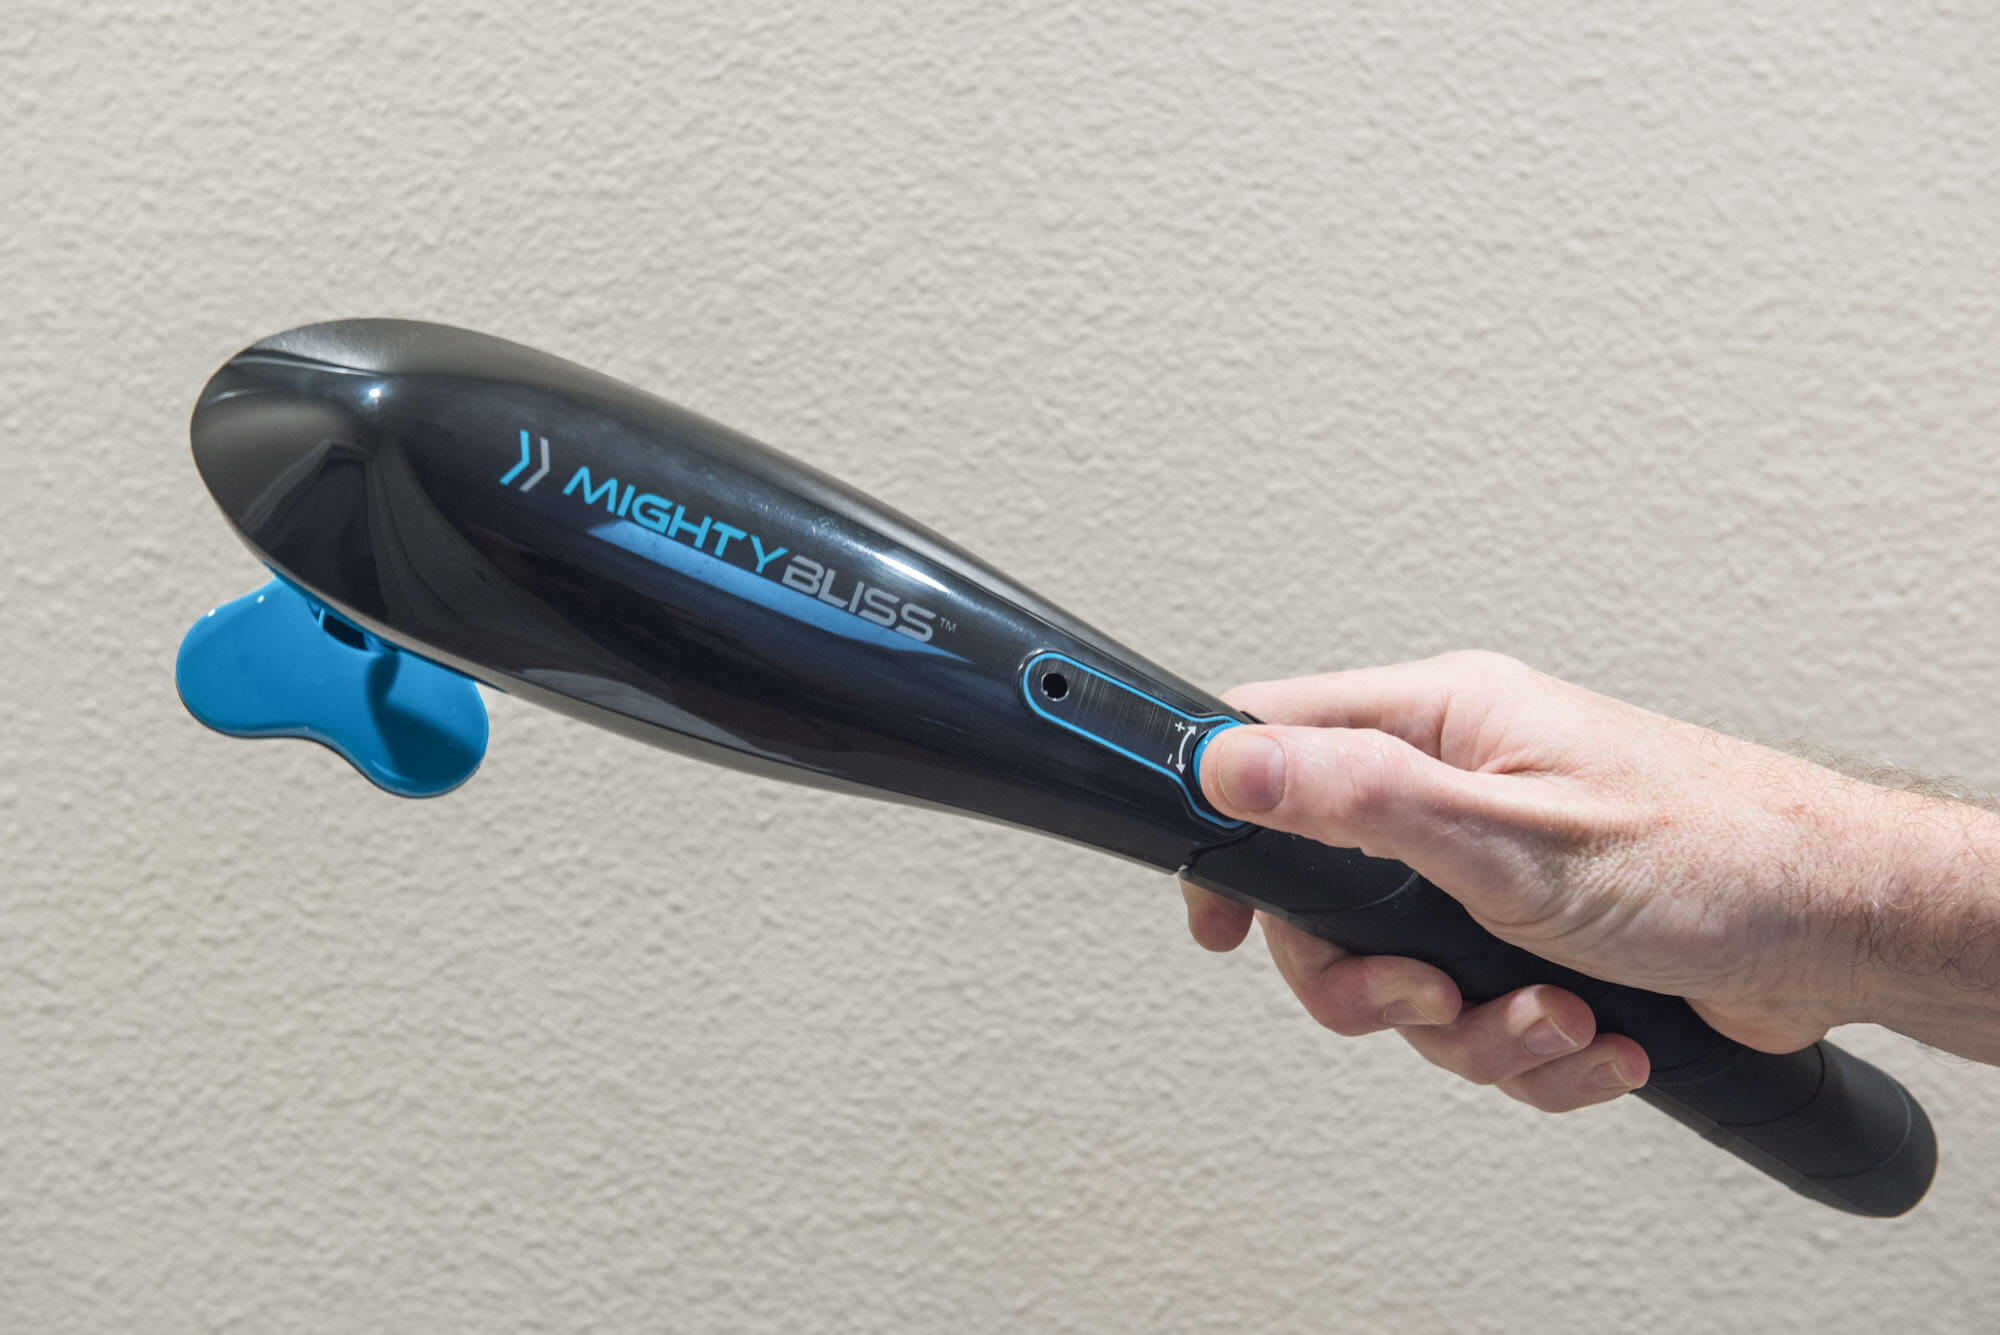 Best Handheld Back Massagers - She's Trippy